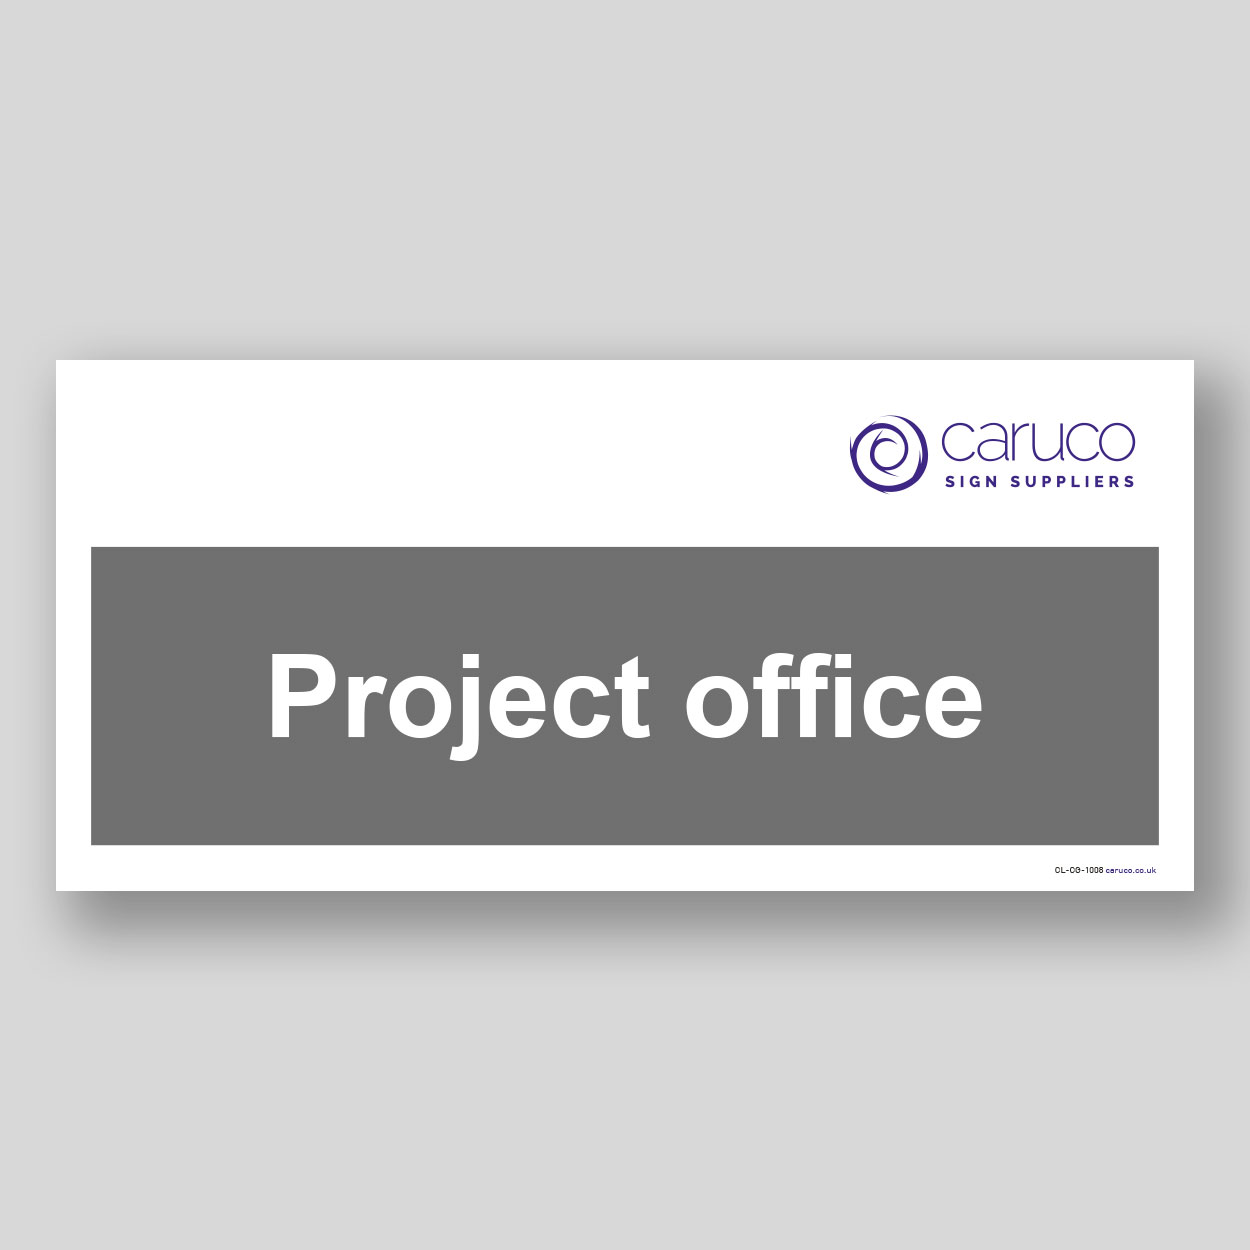 CL-CG-1008 Project office